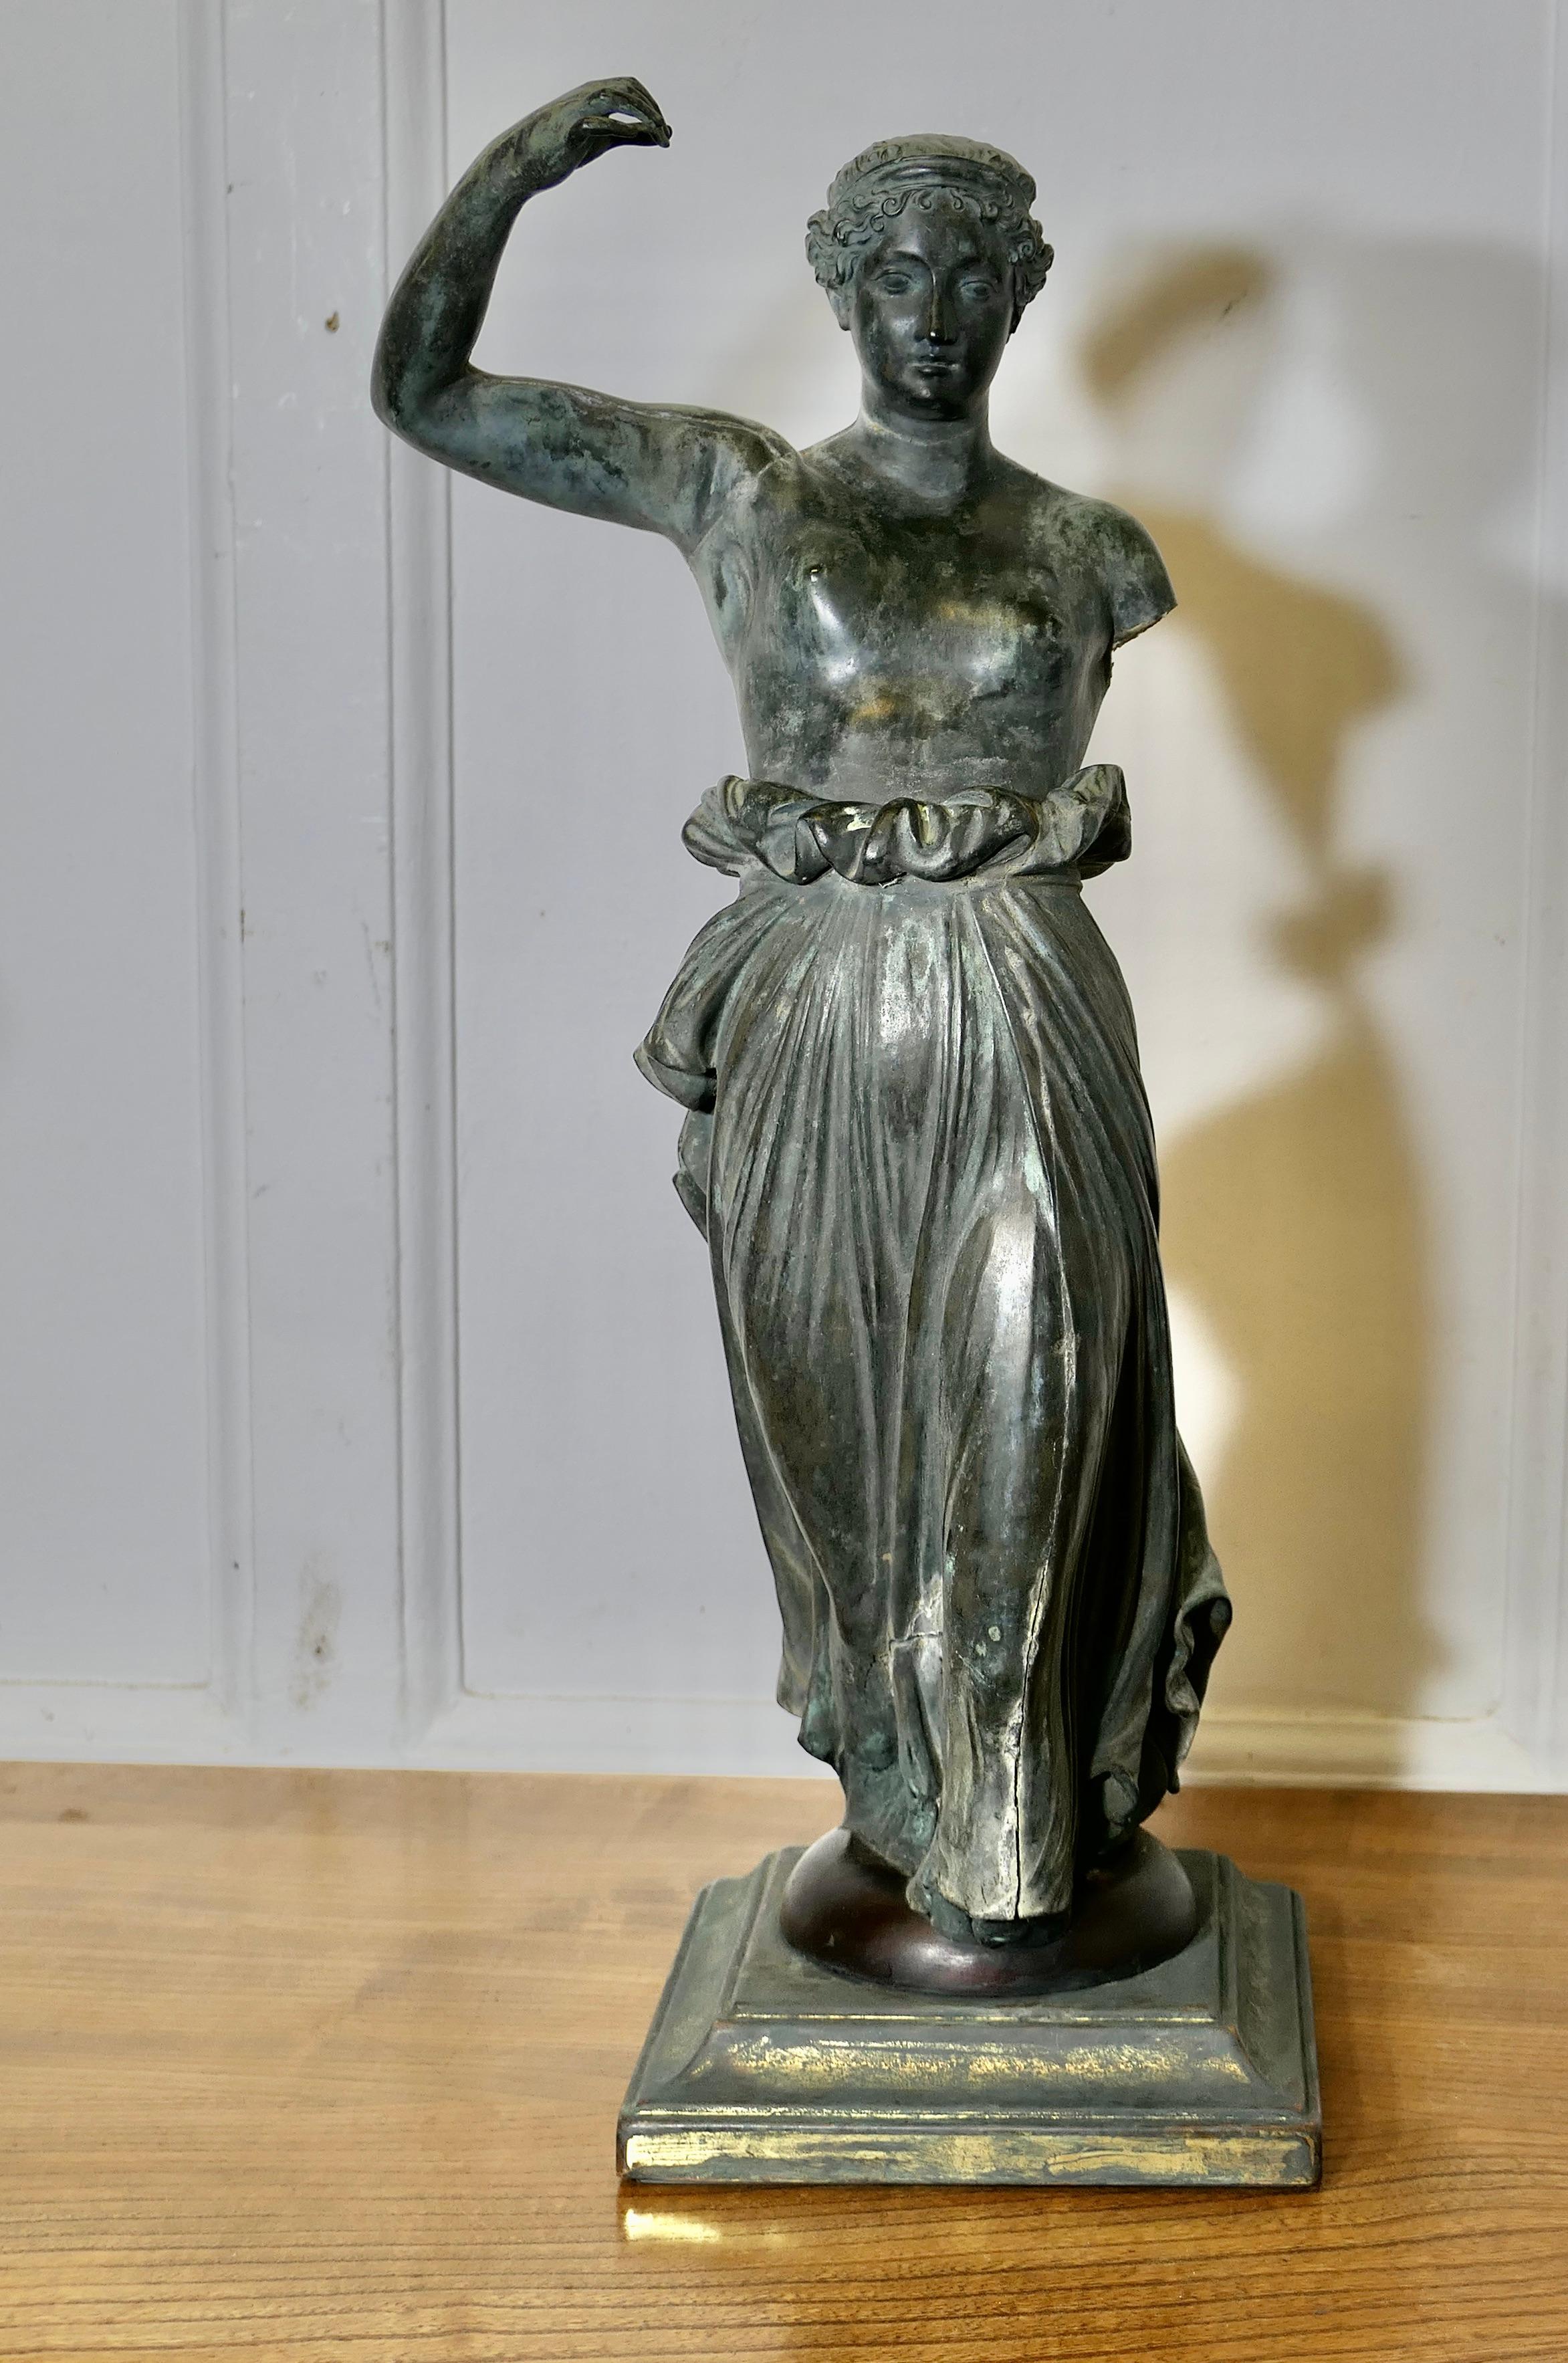 Neo Classical Bronze Statue of Hebe The Greek Goddess of Youth

A handsome piece made in bronze and is set on a square plinth, the statue  is fully 3 dimensional and looks very attractive from all sides
Hebe has a superb ancient patina and she has